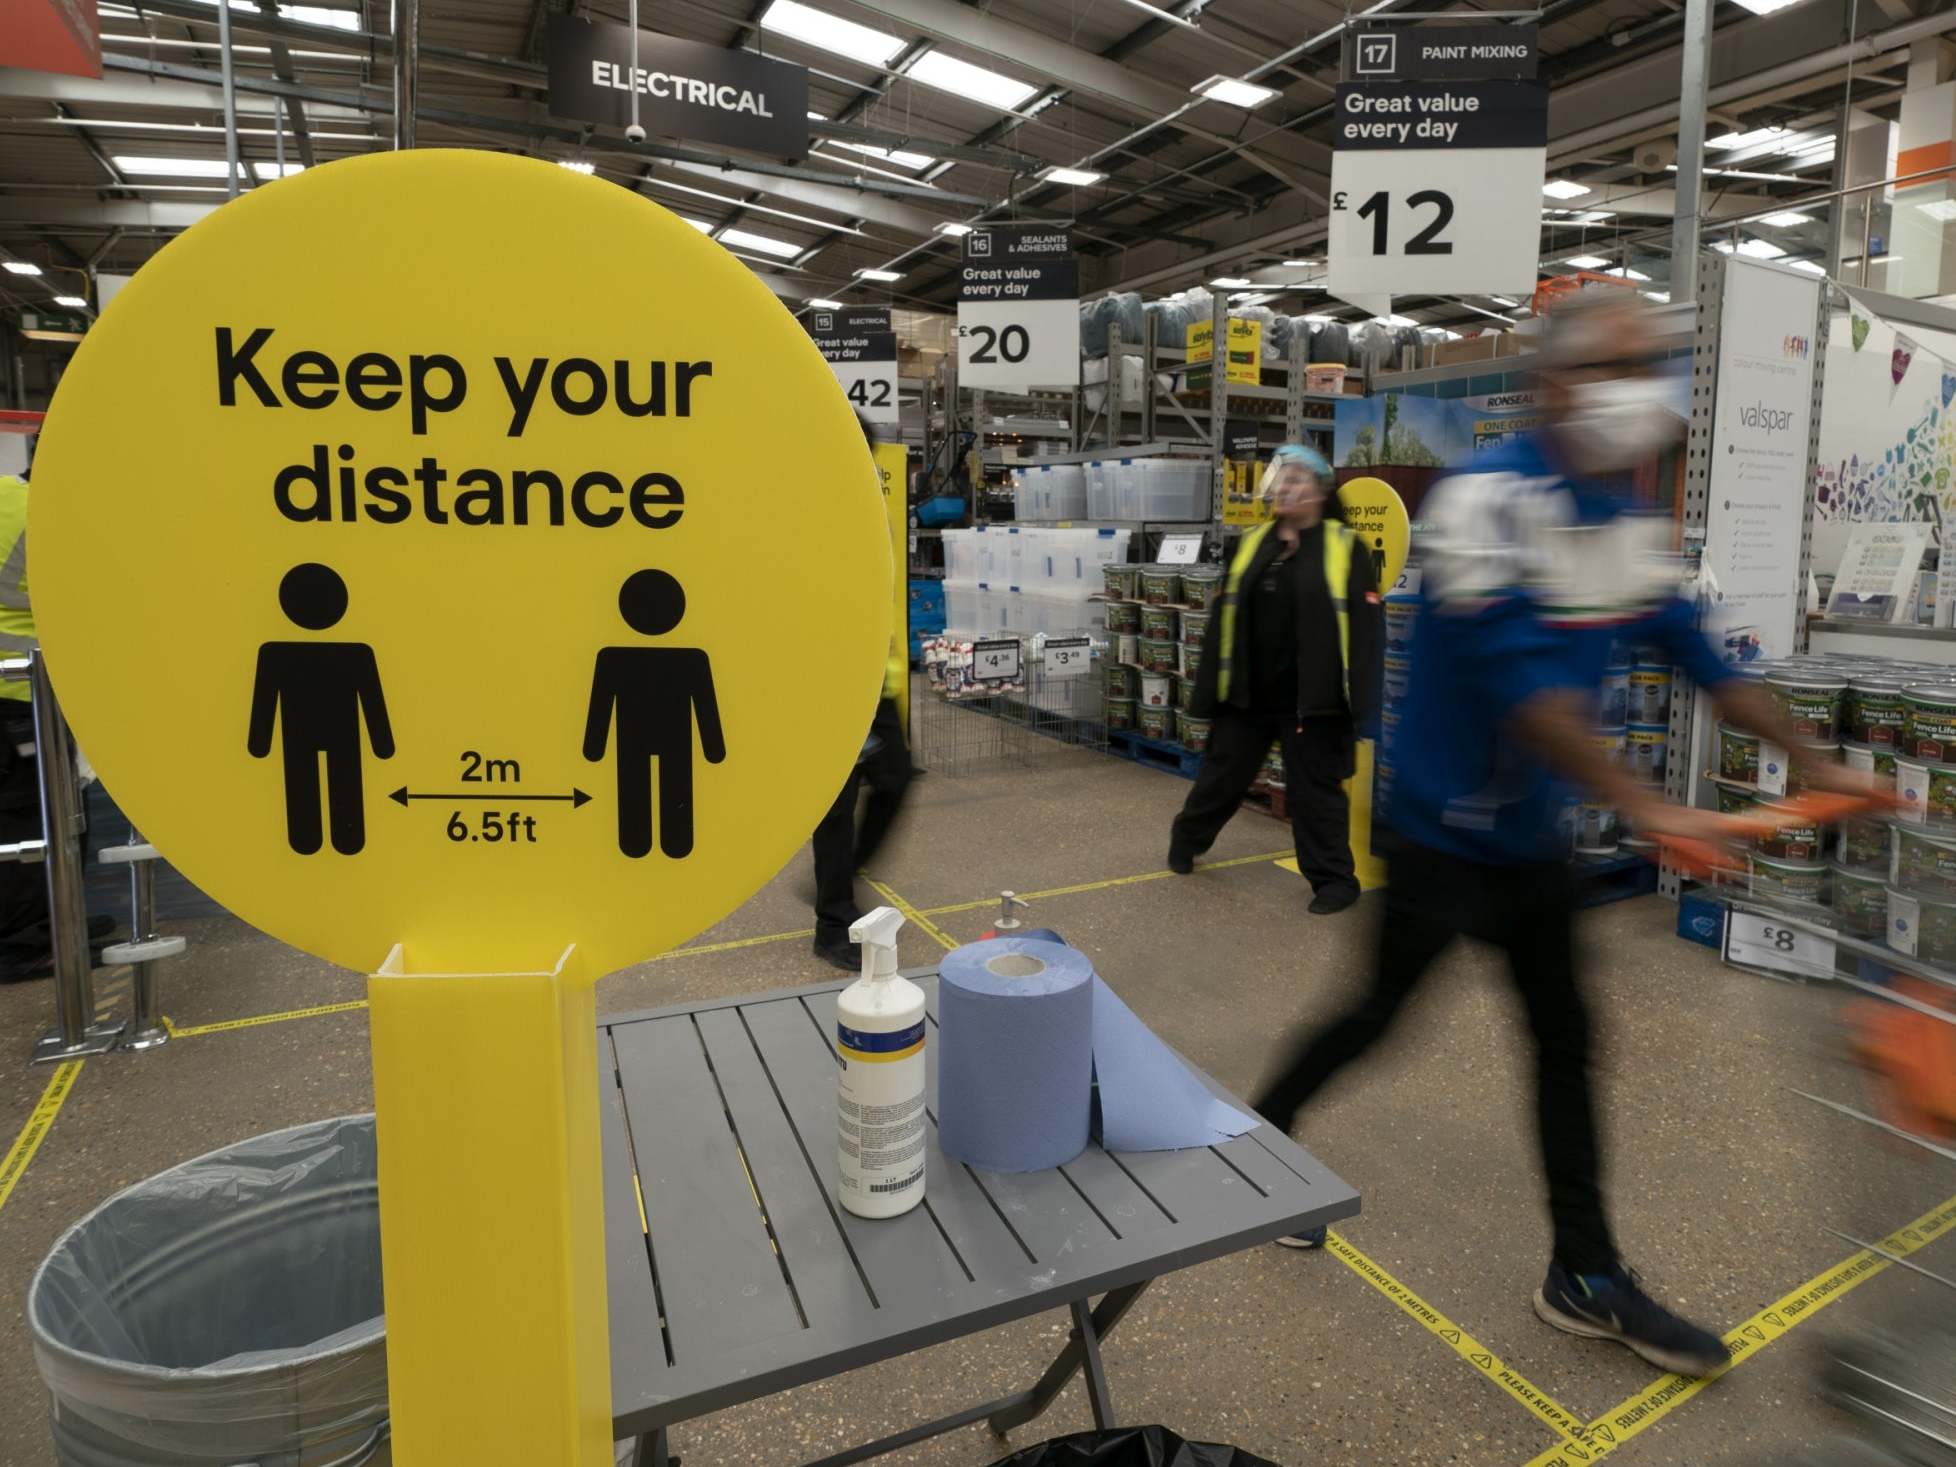 Keep your distance? Two metres could become one